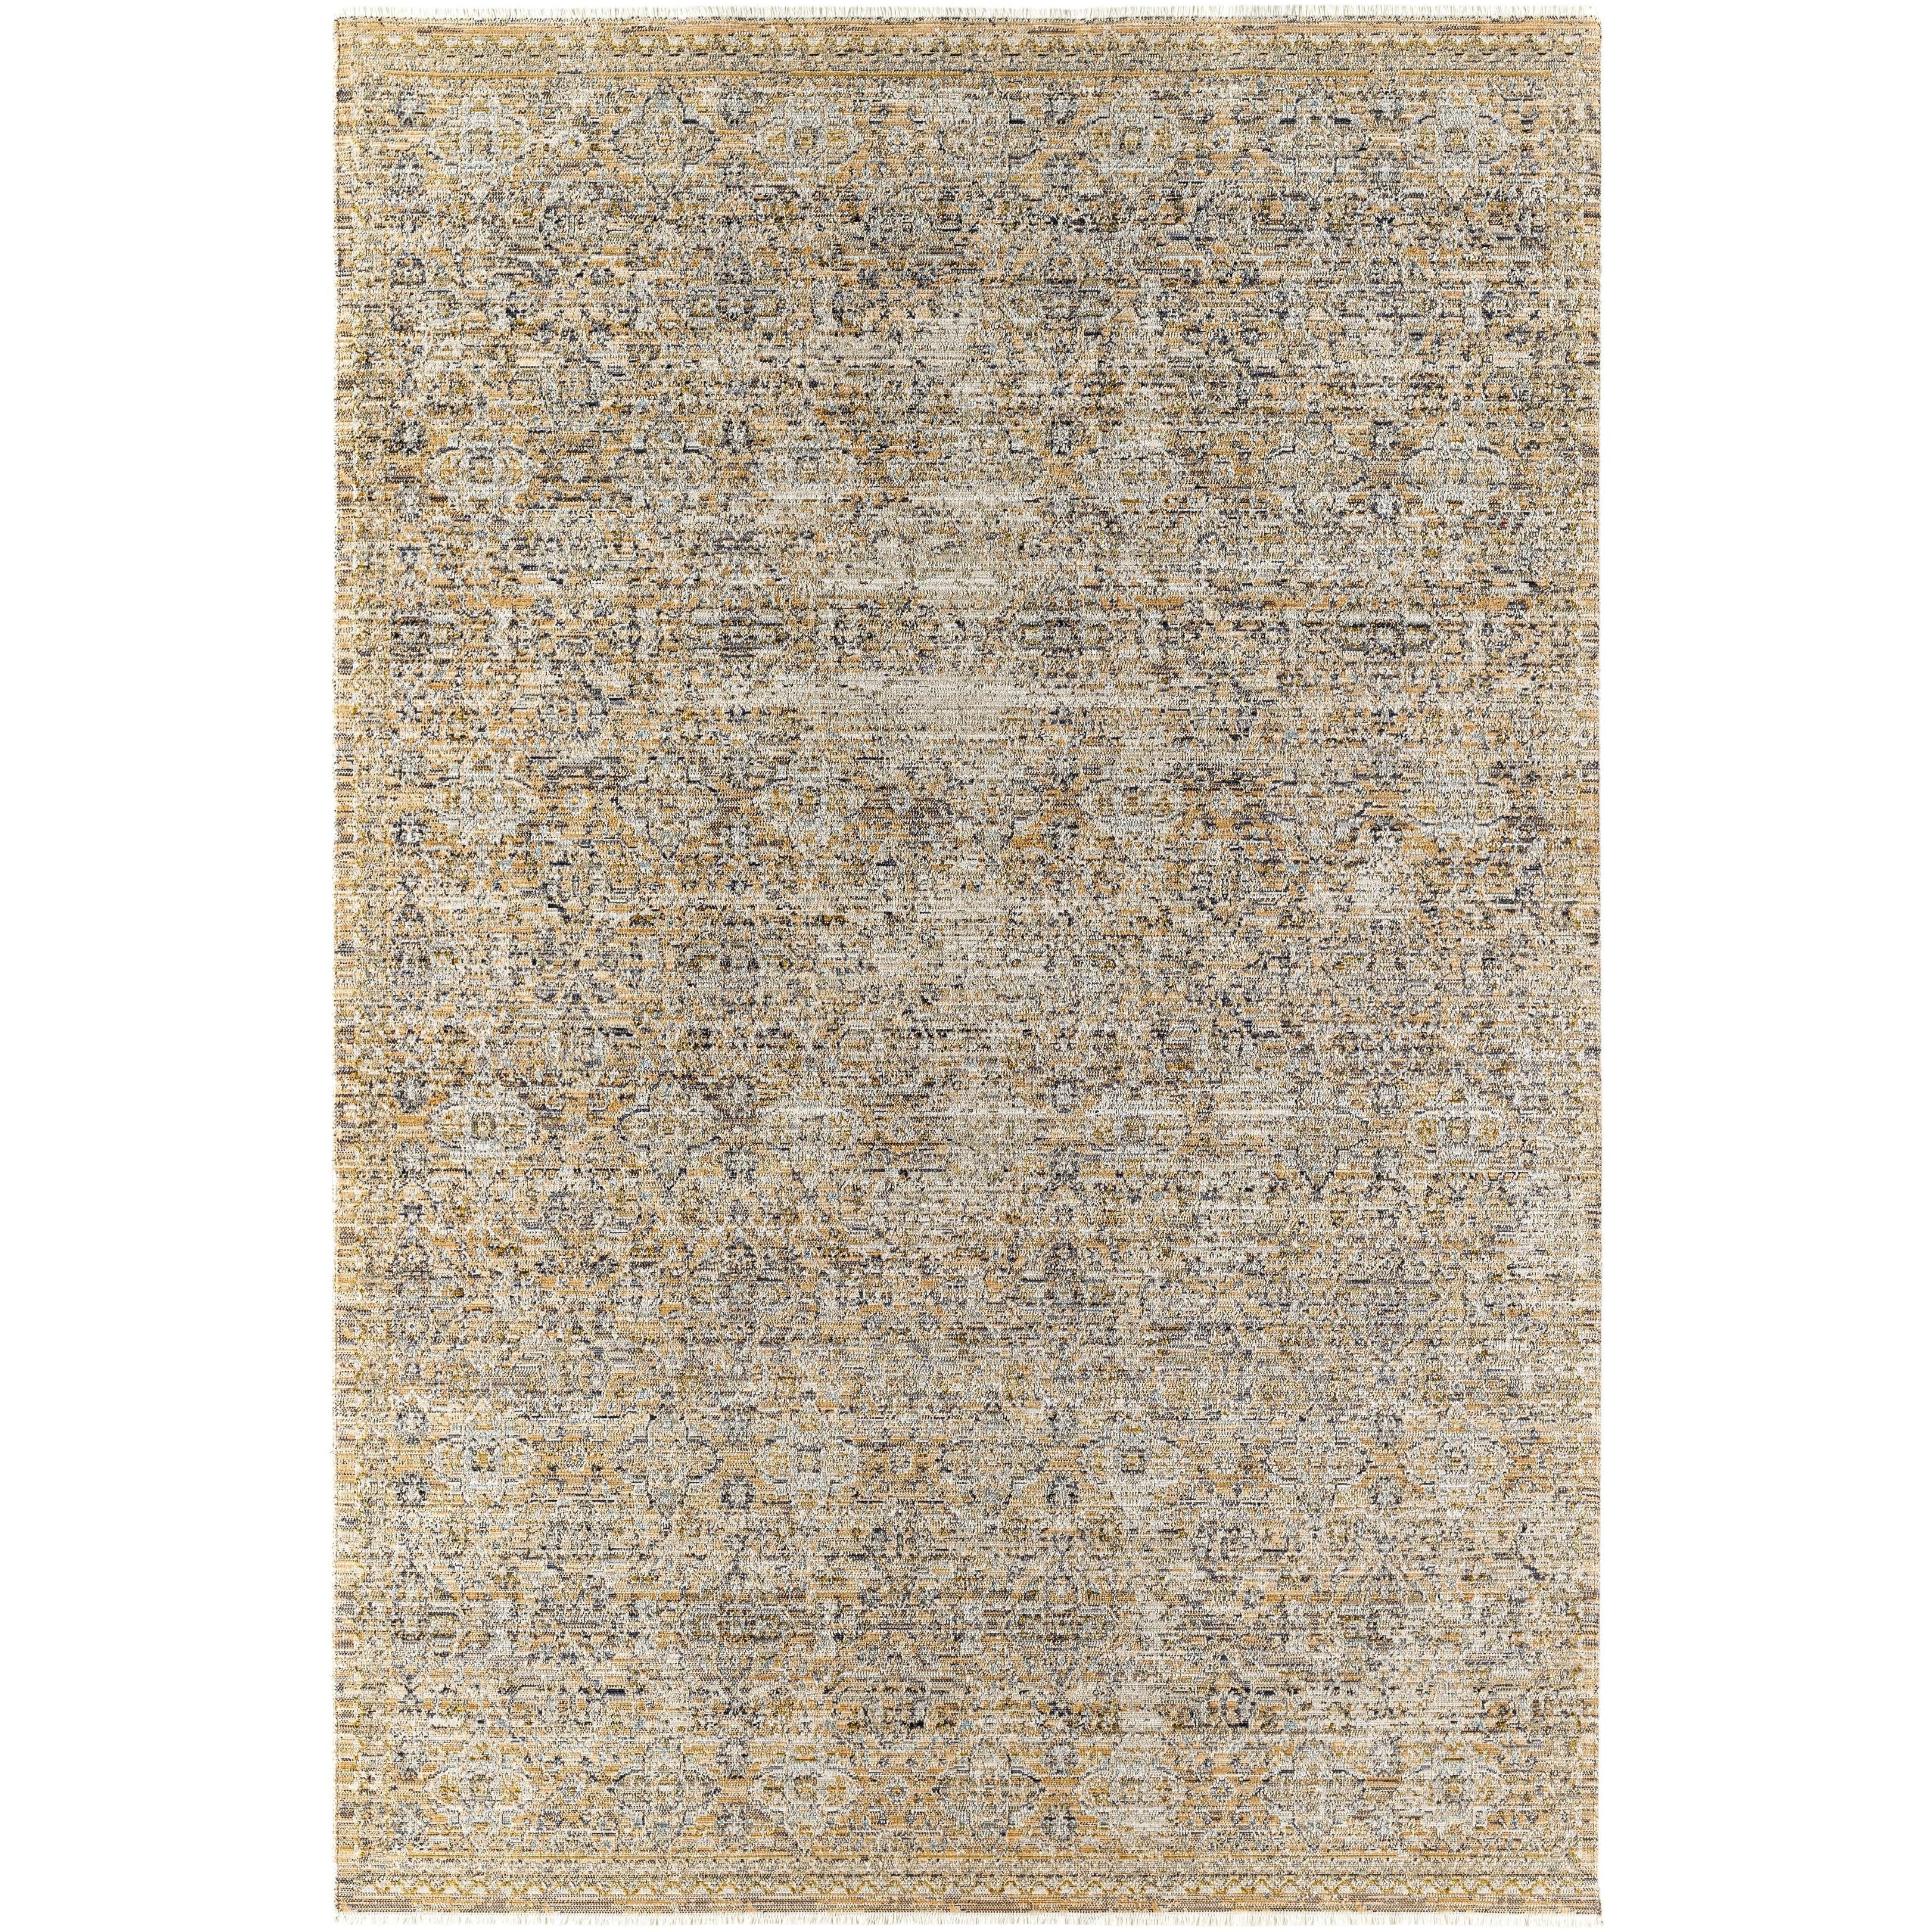 The Margaret area rug is the perfect addition to any room in your home. Designed as a special collaboration between Surya and Becki Owens, this stunning piece is sure to be the center of attention wherever it's placed. Its classic design features a distressed look of beautiful warm taupes and subtle touches of navy and gray. Amethyst Home provides interior design, new home construction design consulting, vintage area rugs, and lighting in the Austin metro area.